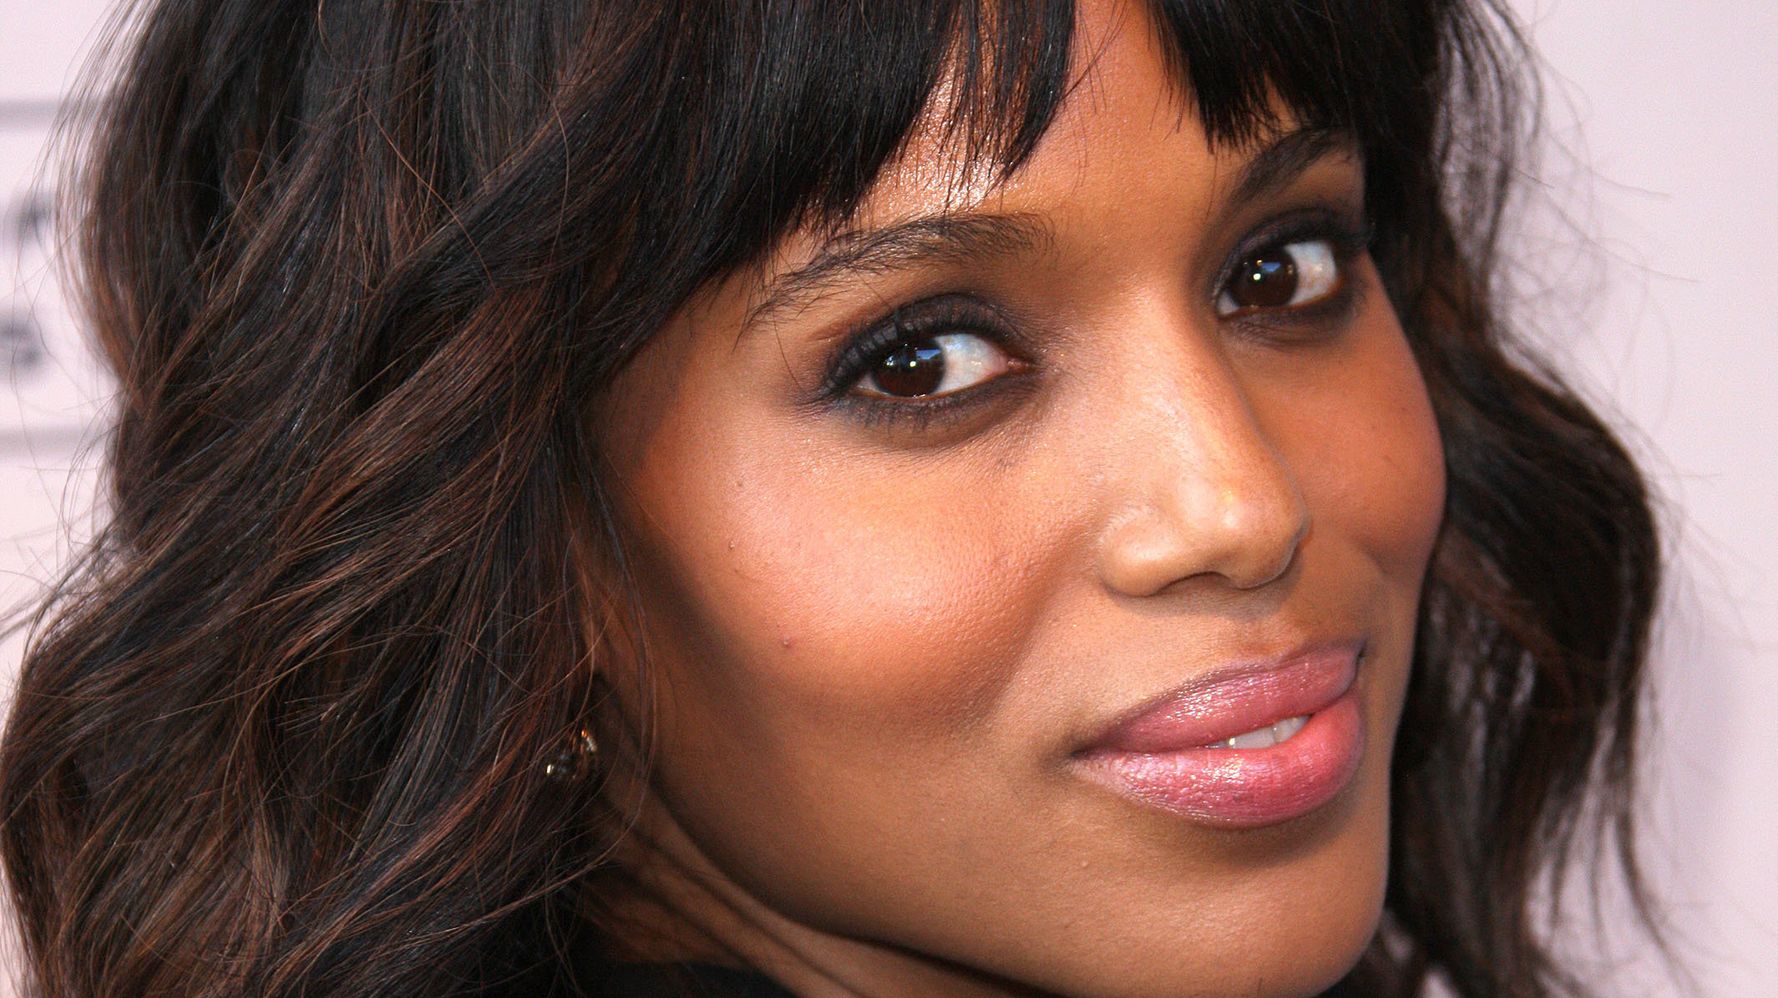 Hair Alert Best Bangs For Your Face Shape Huffpost Uk Style And Beauty